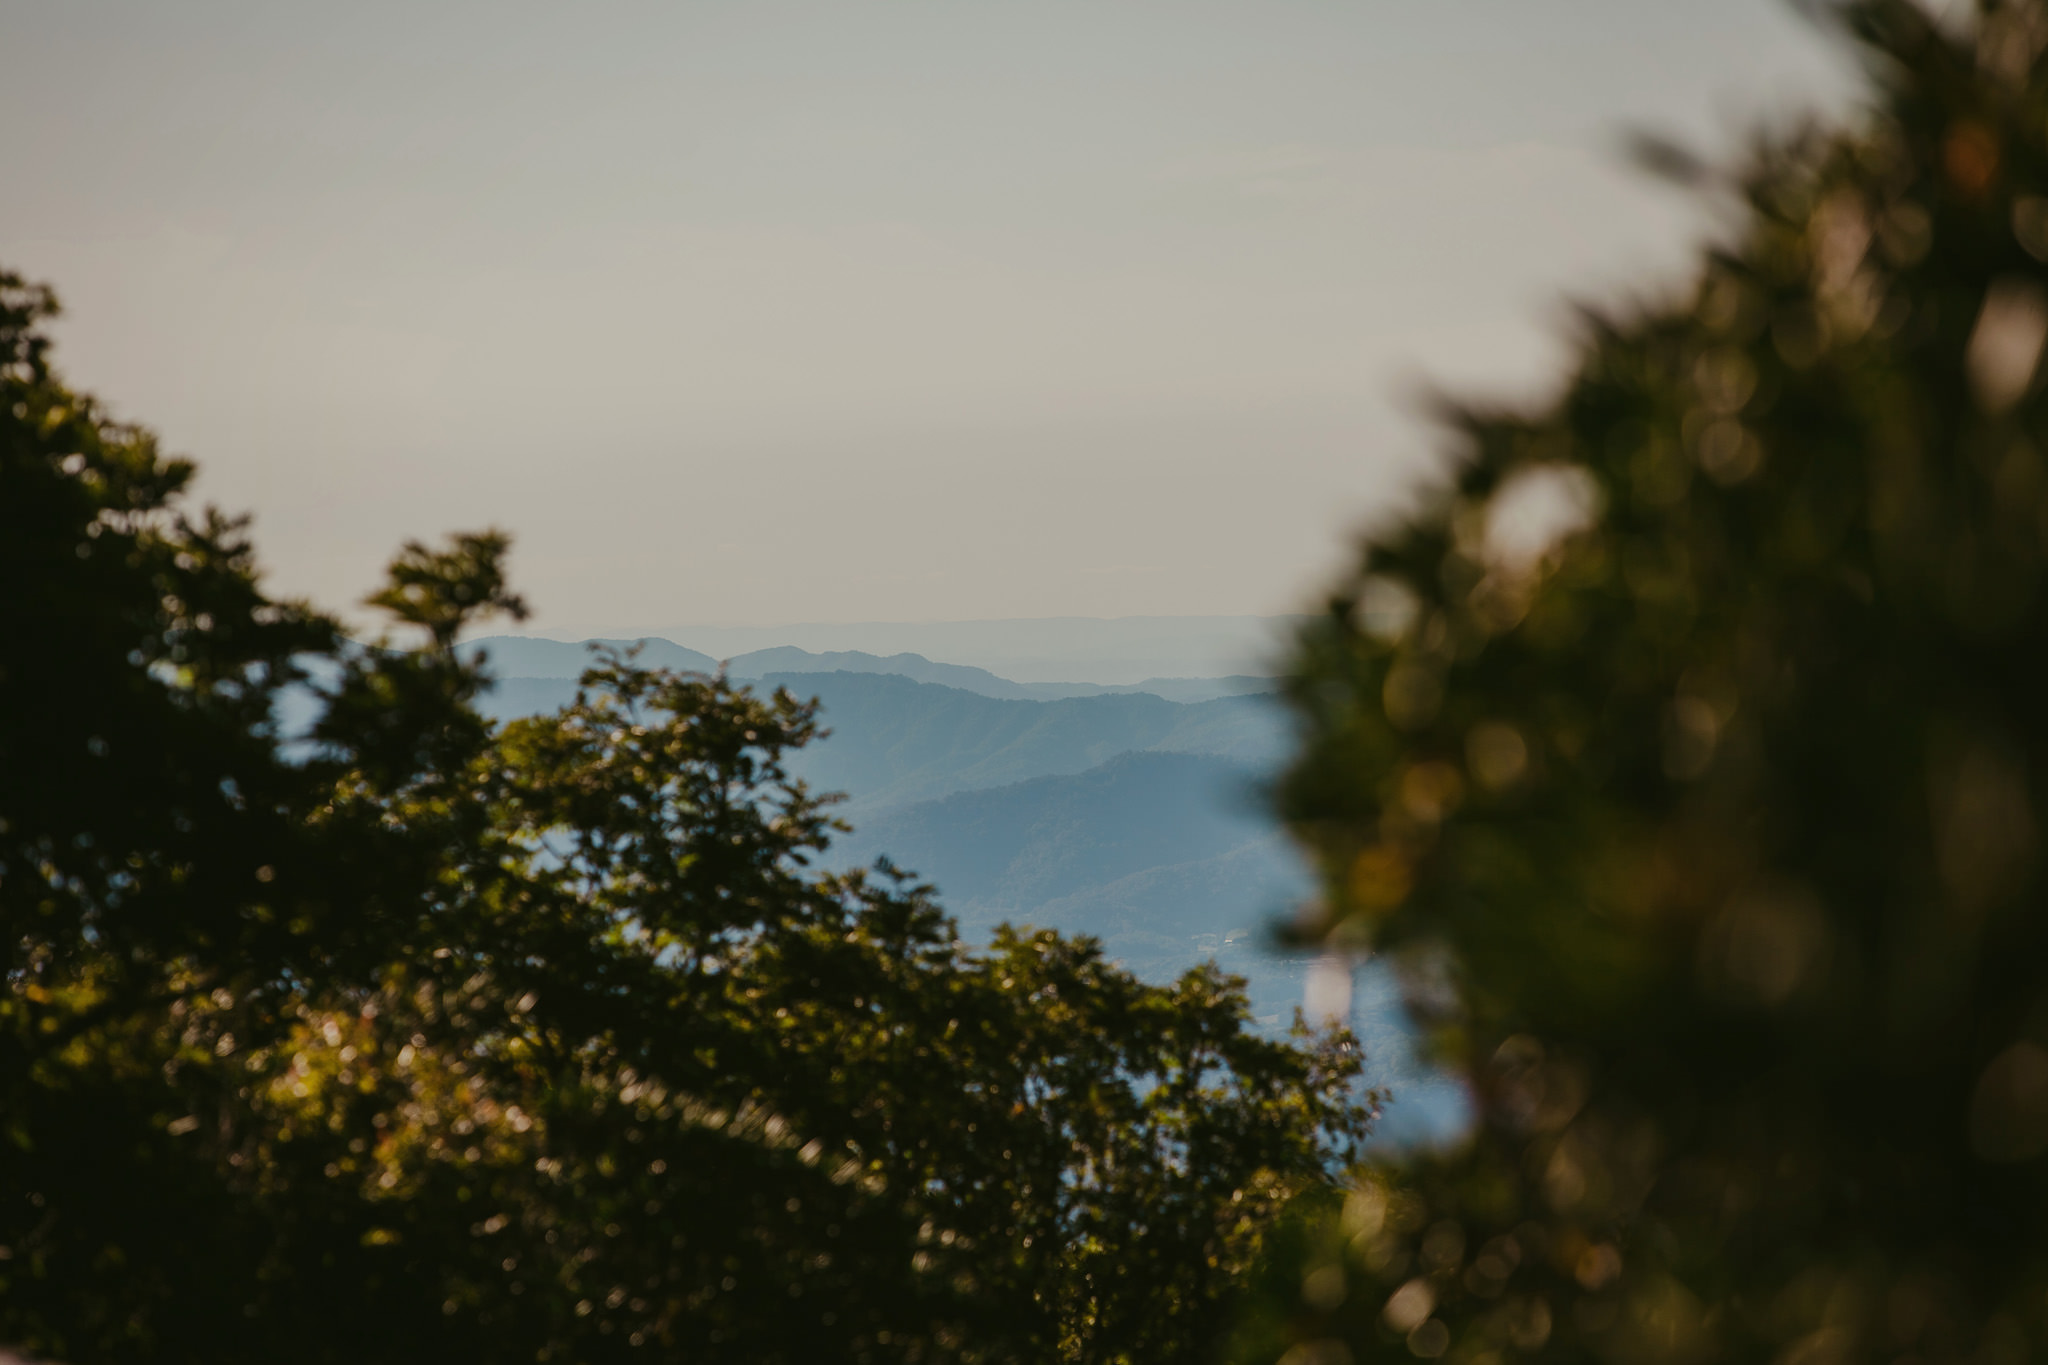 View of the Blue Ridge Mountains from Craggy Gardens